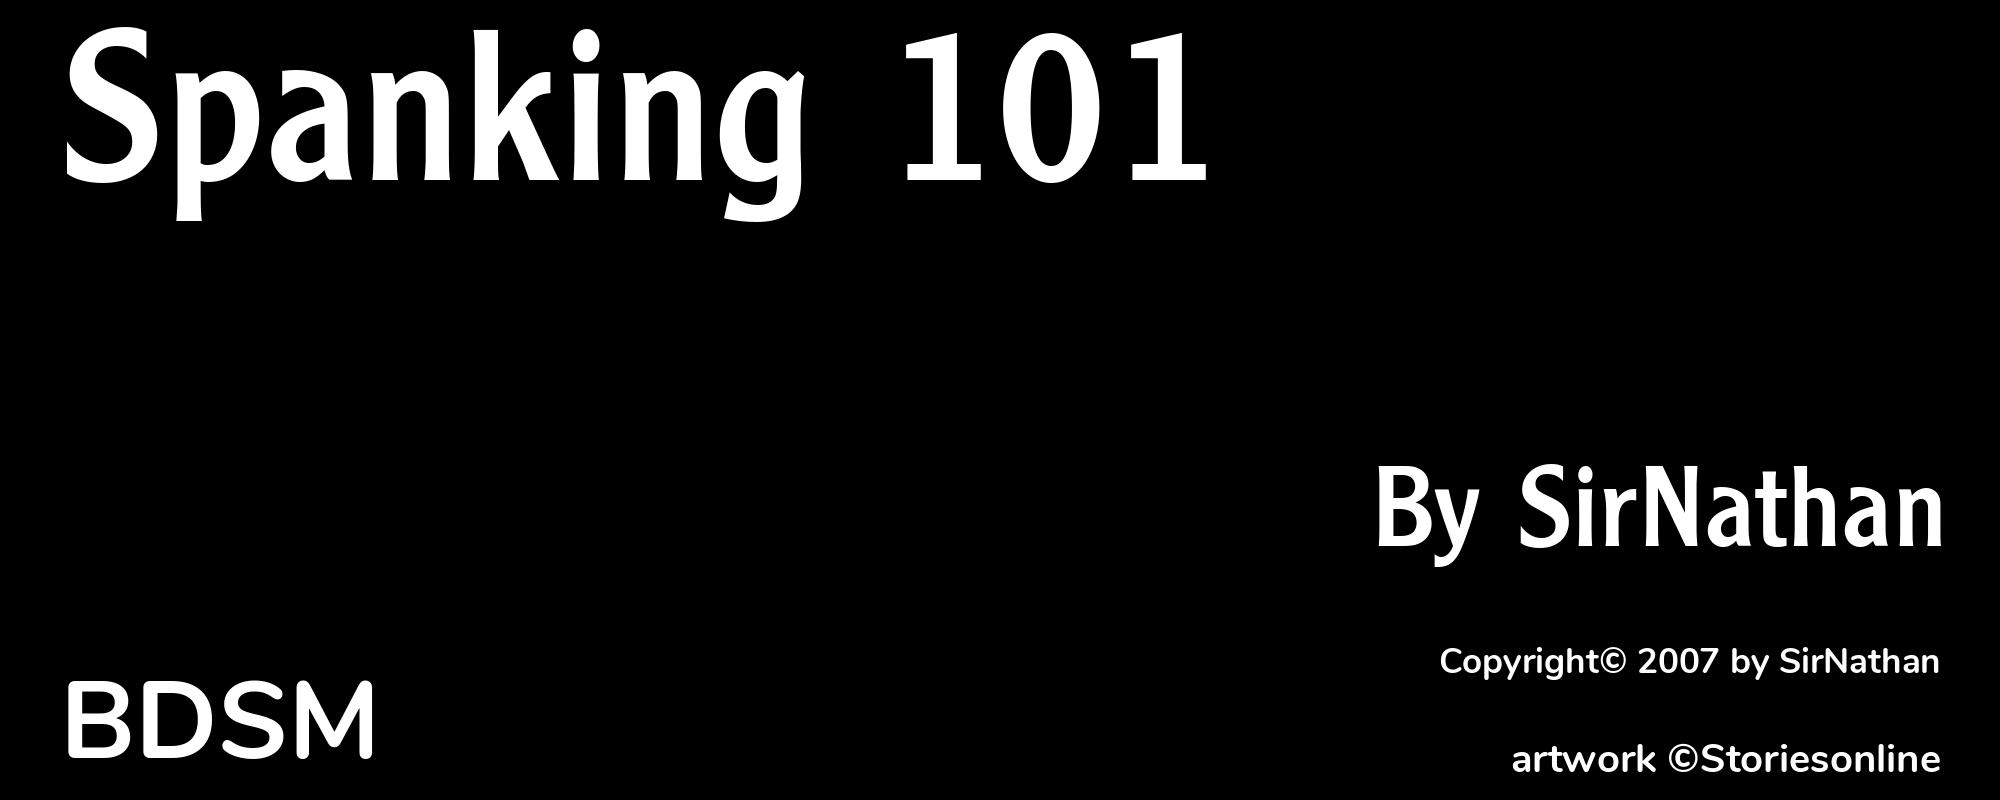 Spanking 101 - Cover